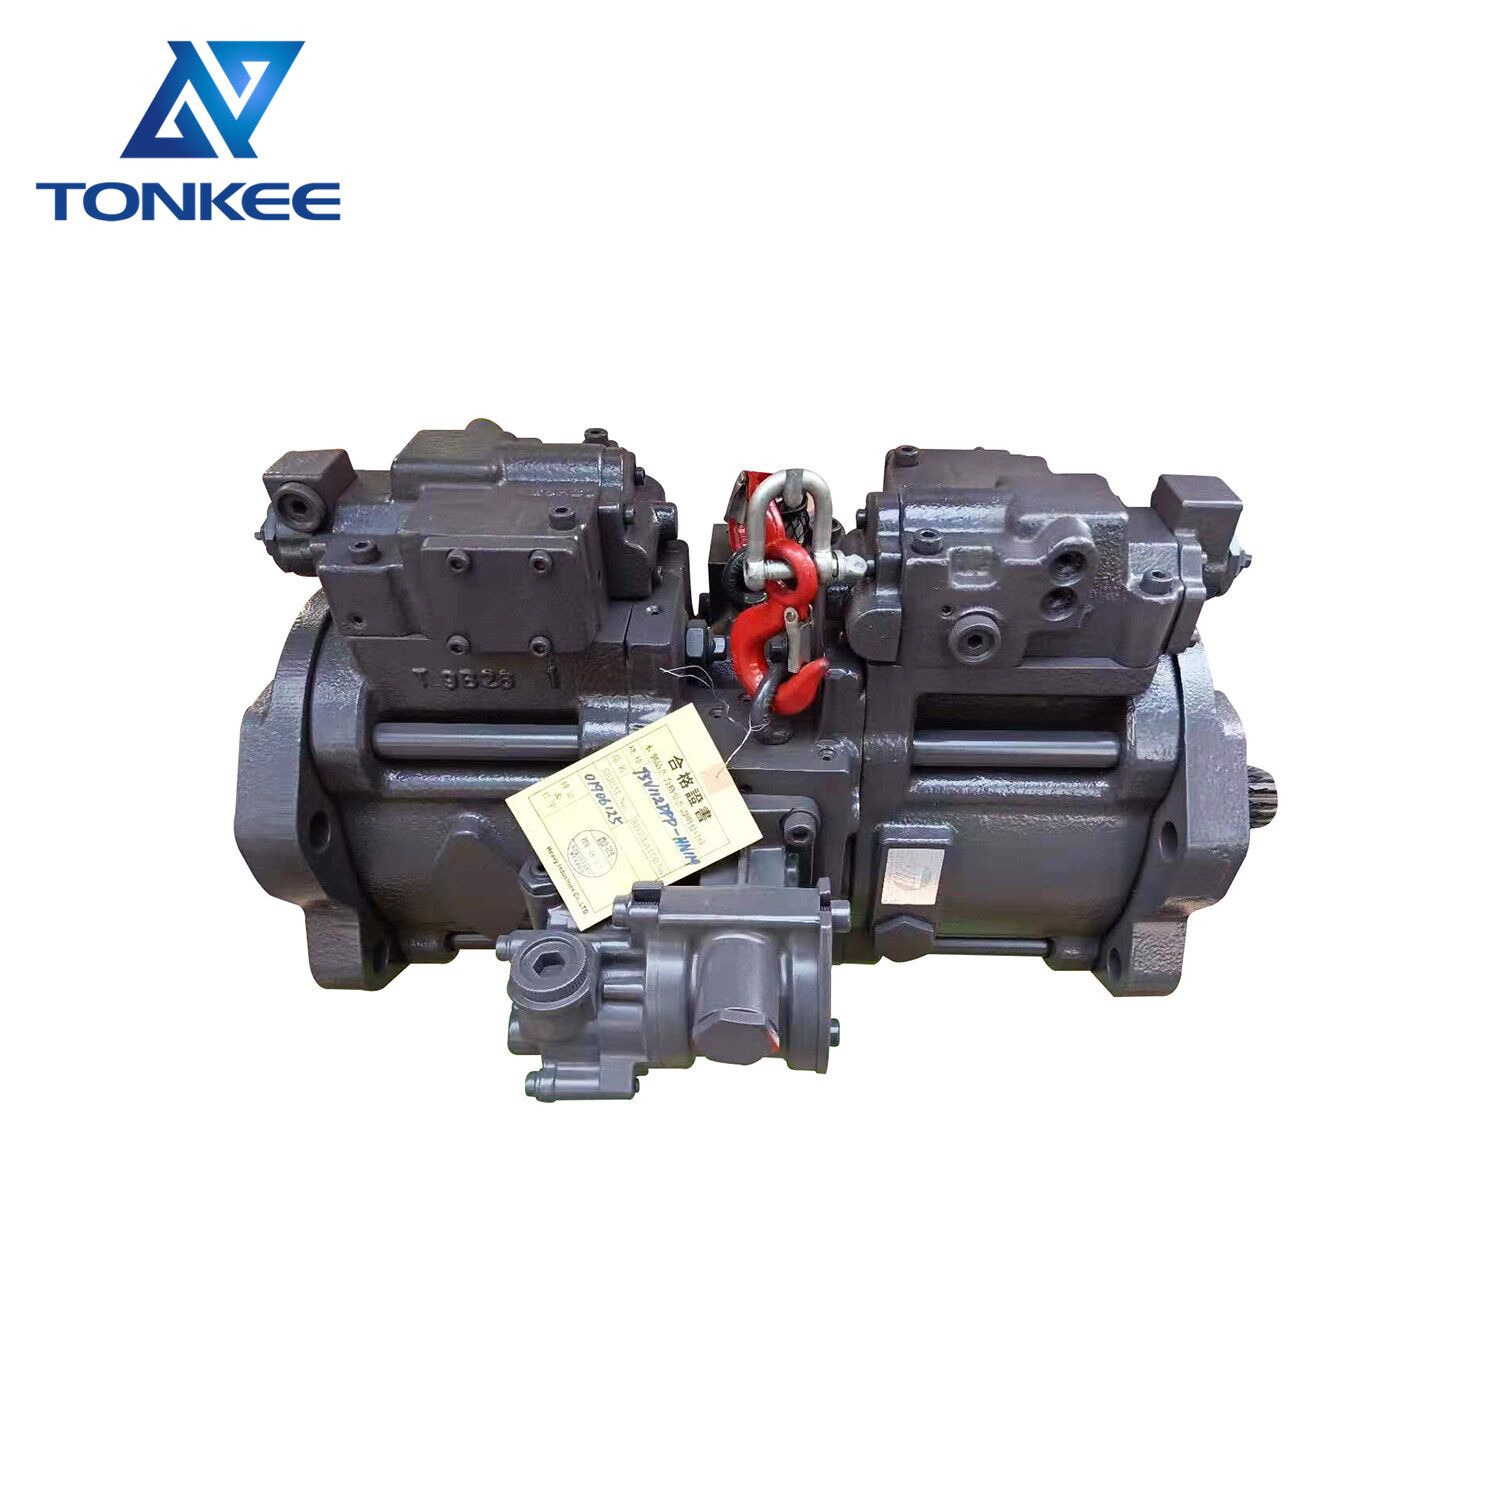 TONGMYUNG KRJ6199 K3V112DTP16AR-9N49 K3V112DTP-9N49 K3V112DTP hydraulic piston pump assy CX210 SH200A3 excavator main pump assembly suitable for CASE SUMITOMO